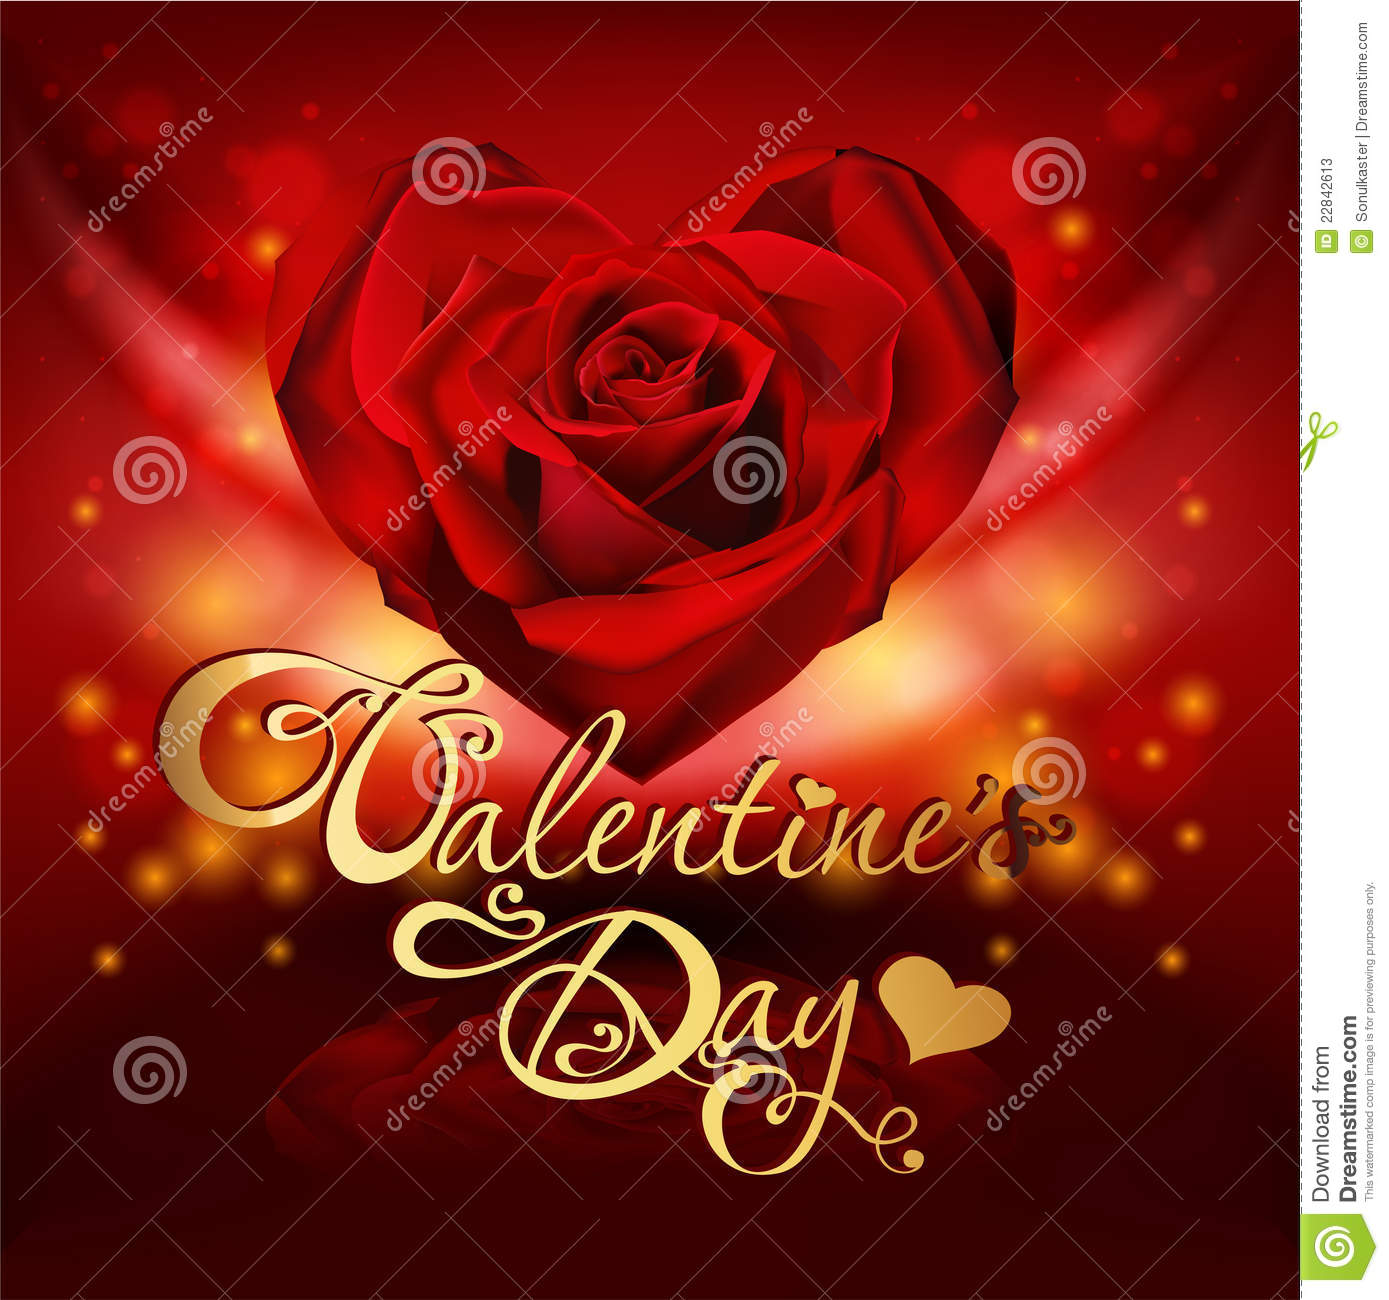 More Similar Stock Images Of   Valentine S Day Card With Roses